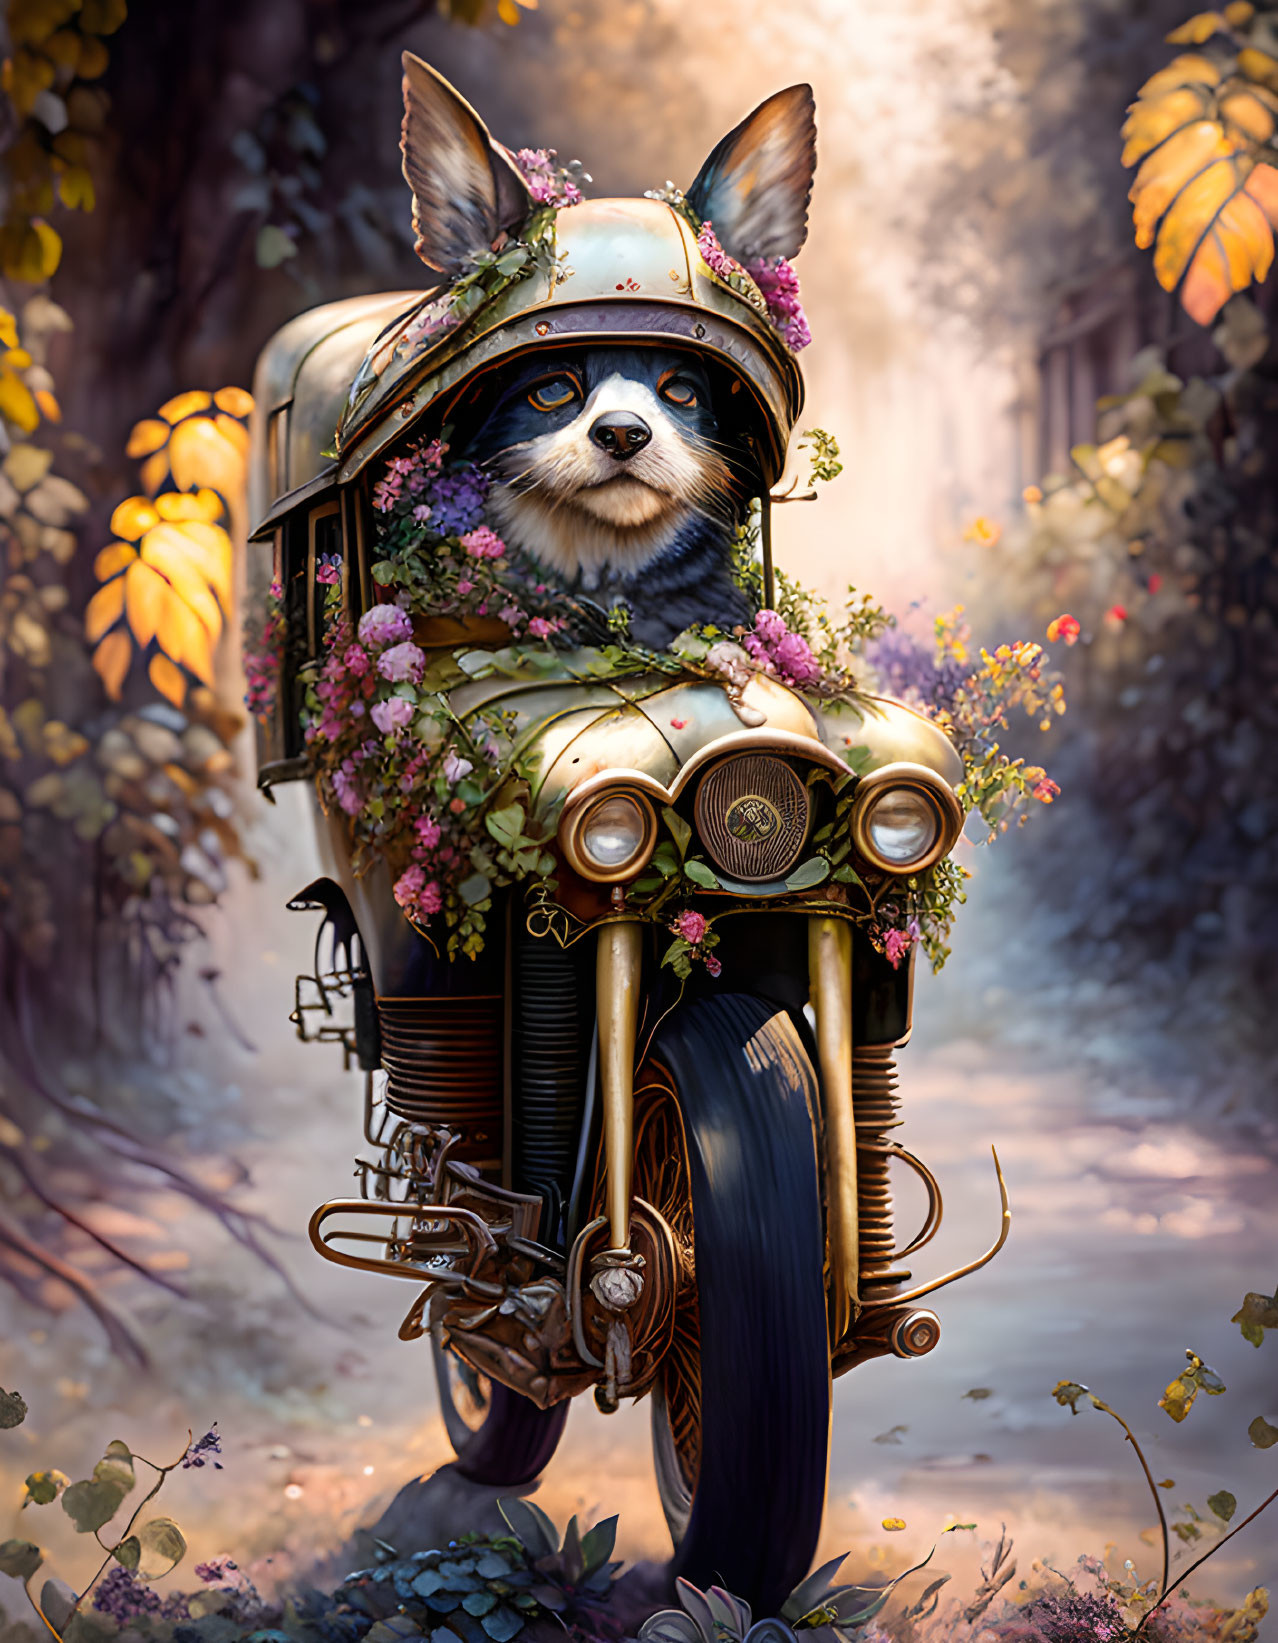 Anthropomorphic raccoon on vintage motorcycle in mystical forest at sunset